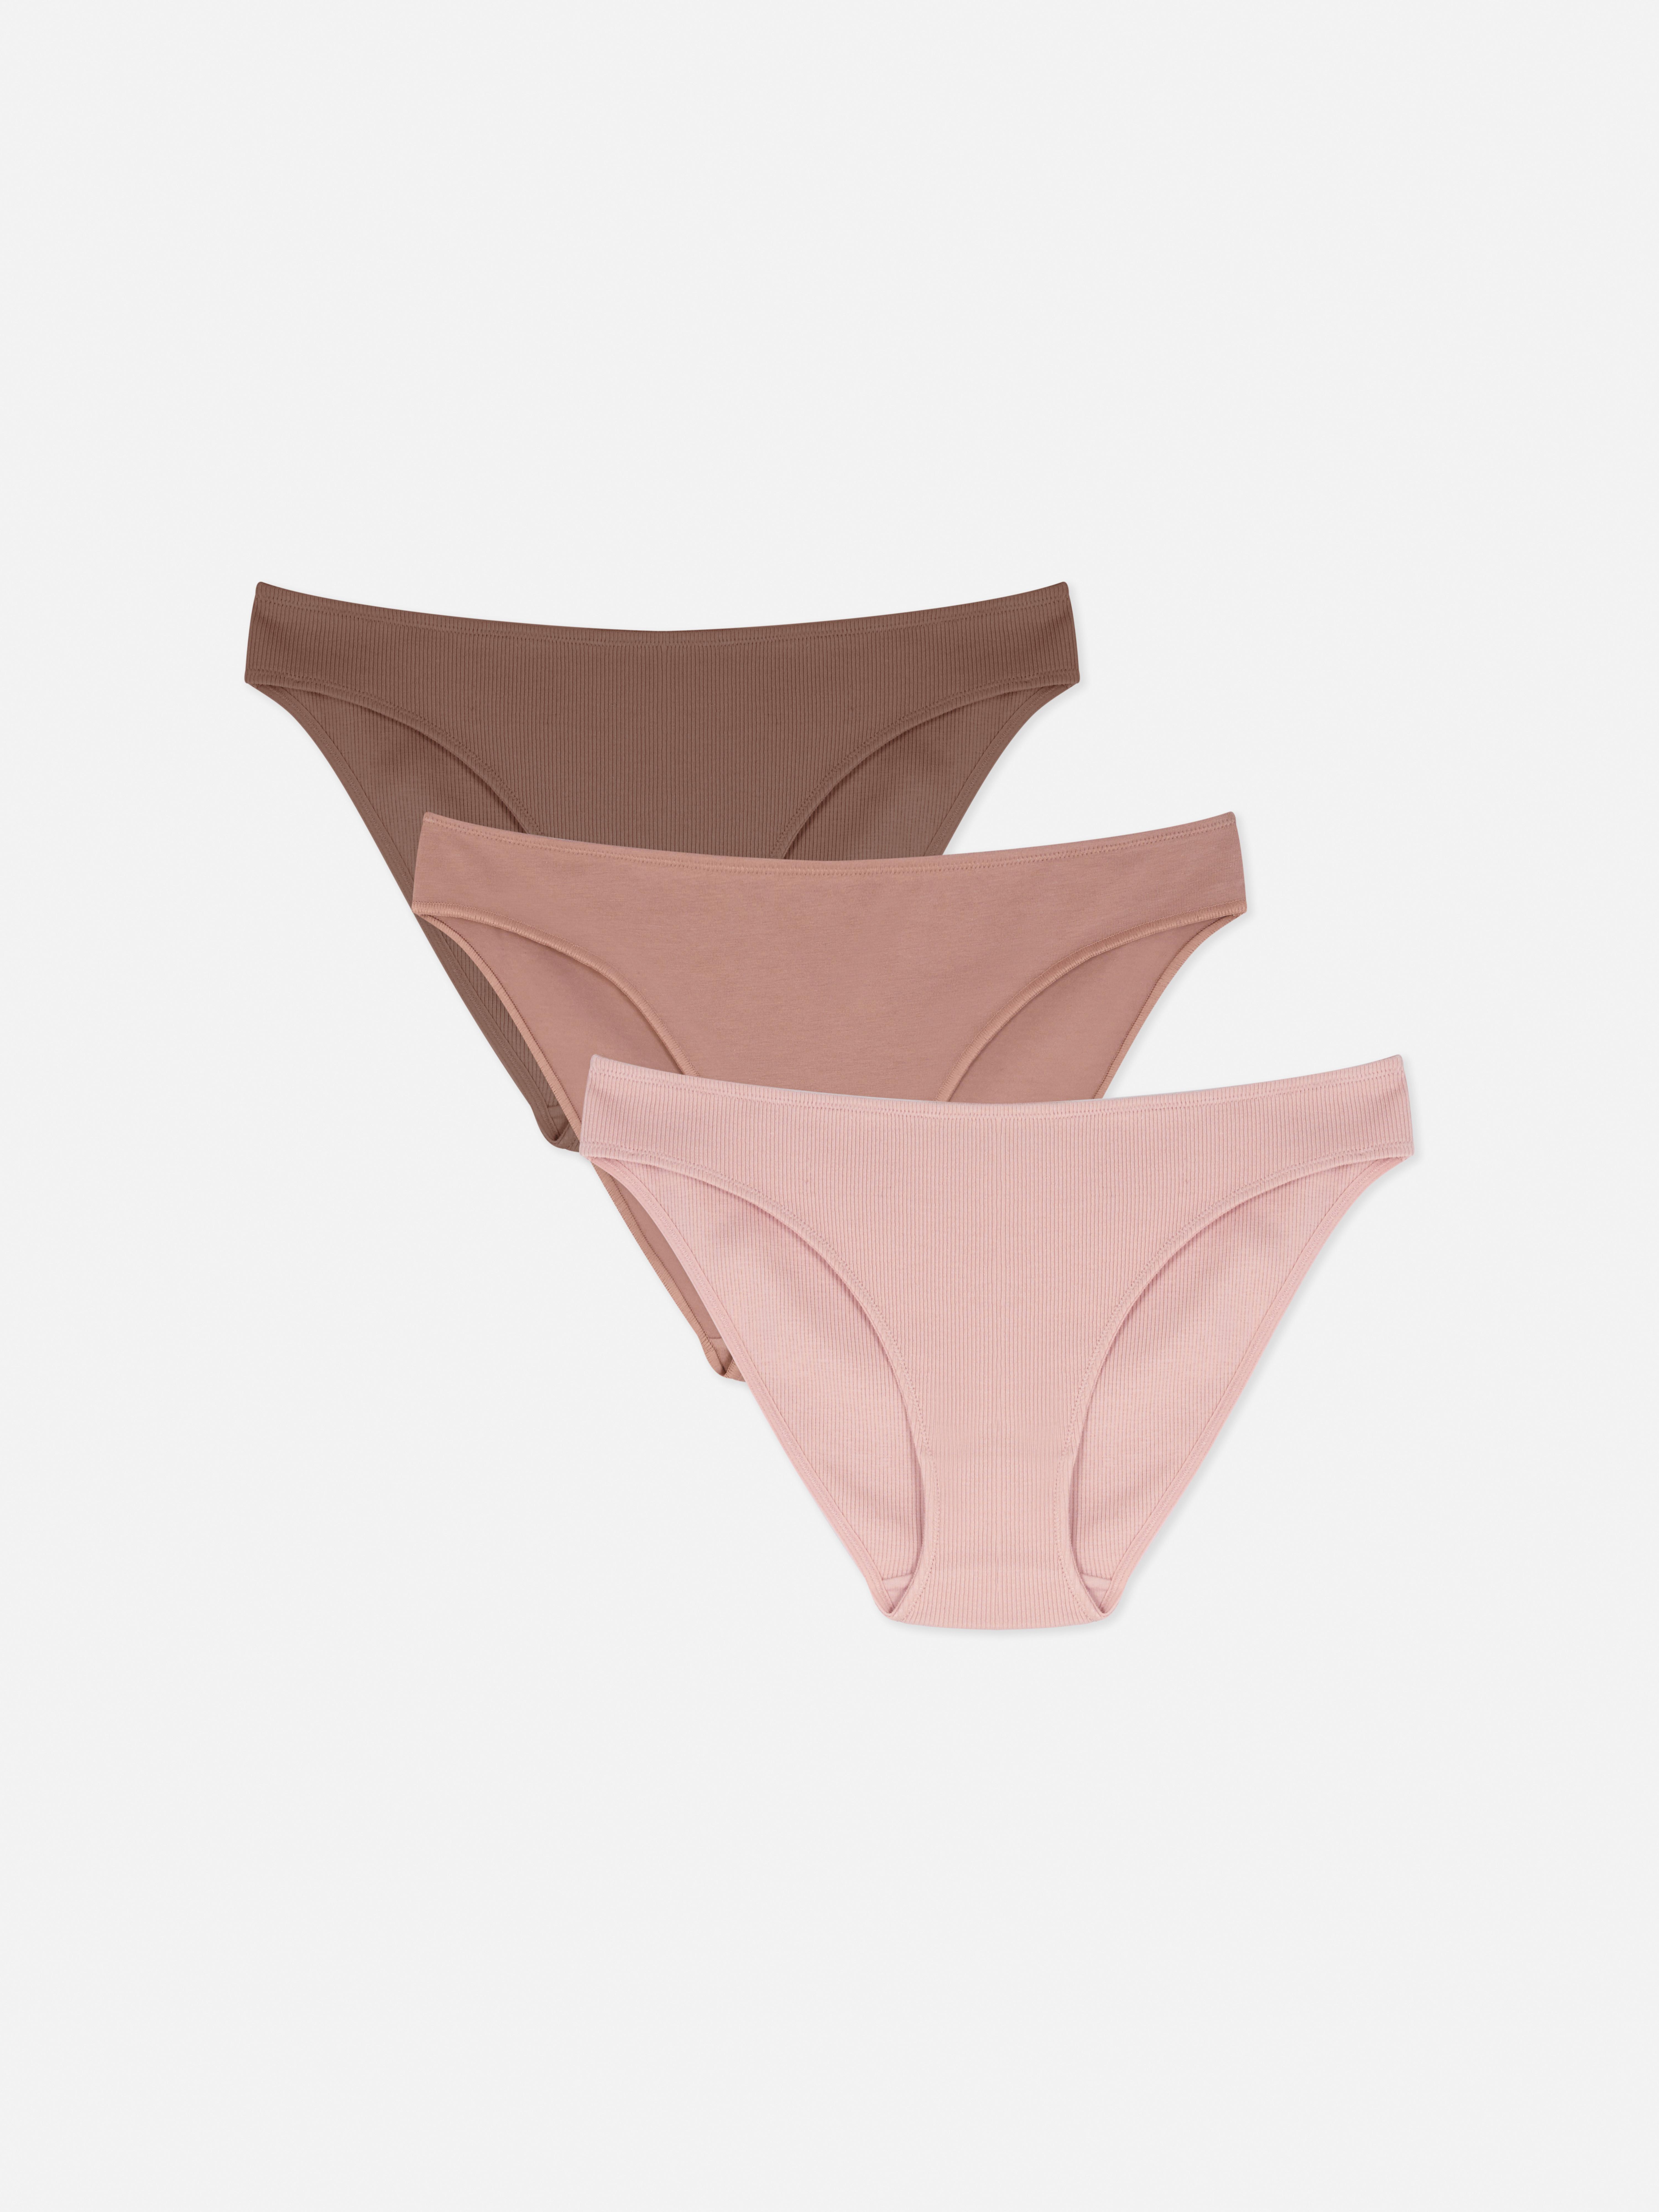 PRIMARK SECRET POSSESSIONS SILKY TOUCH KNICKERS BRAZILIAN PANTIES